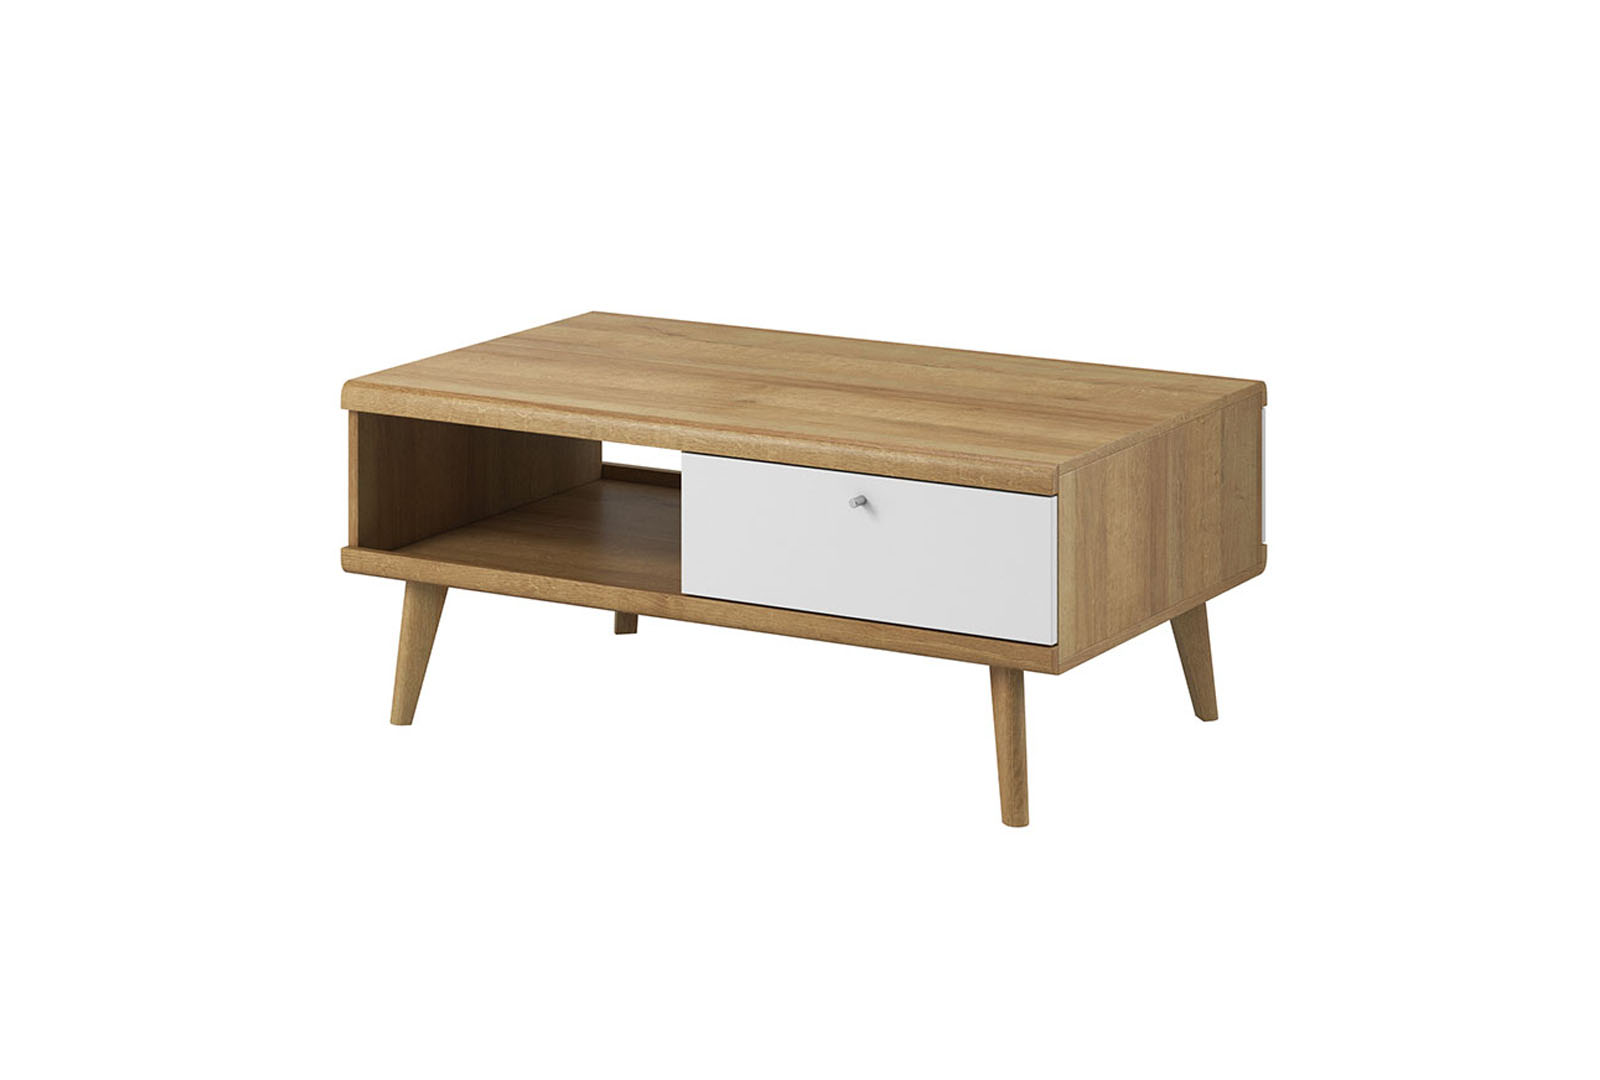 Prime PL107 coffee table with drawers